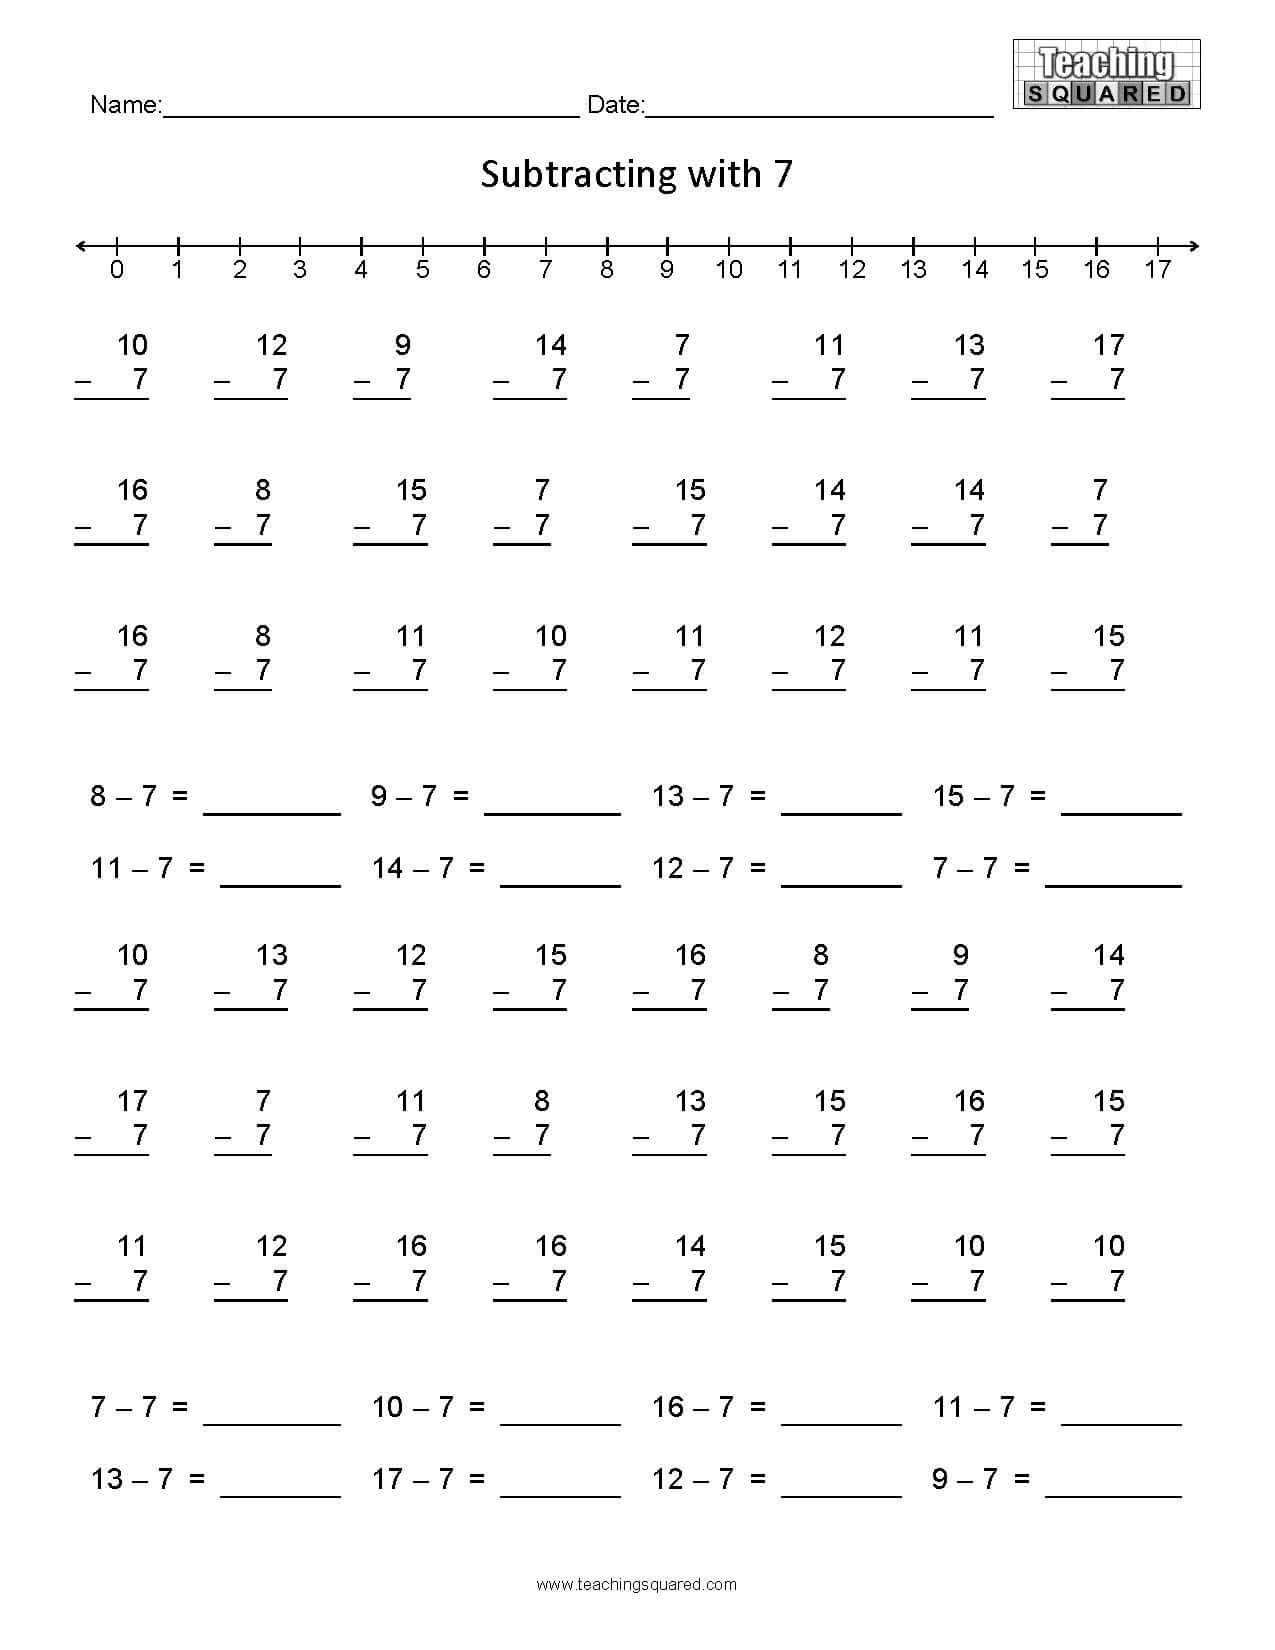 Learning Subtraction- Minus 7 teaching and homeschool worksheets